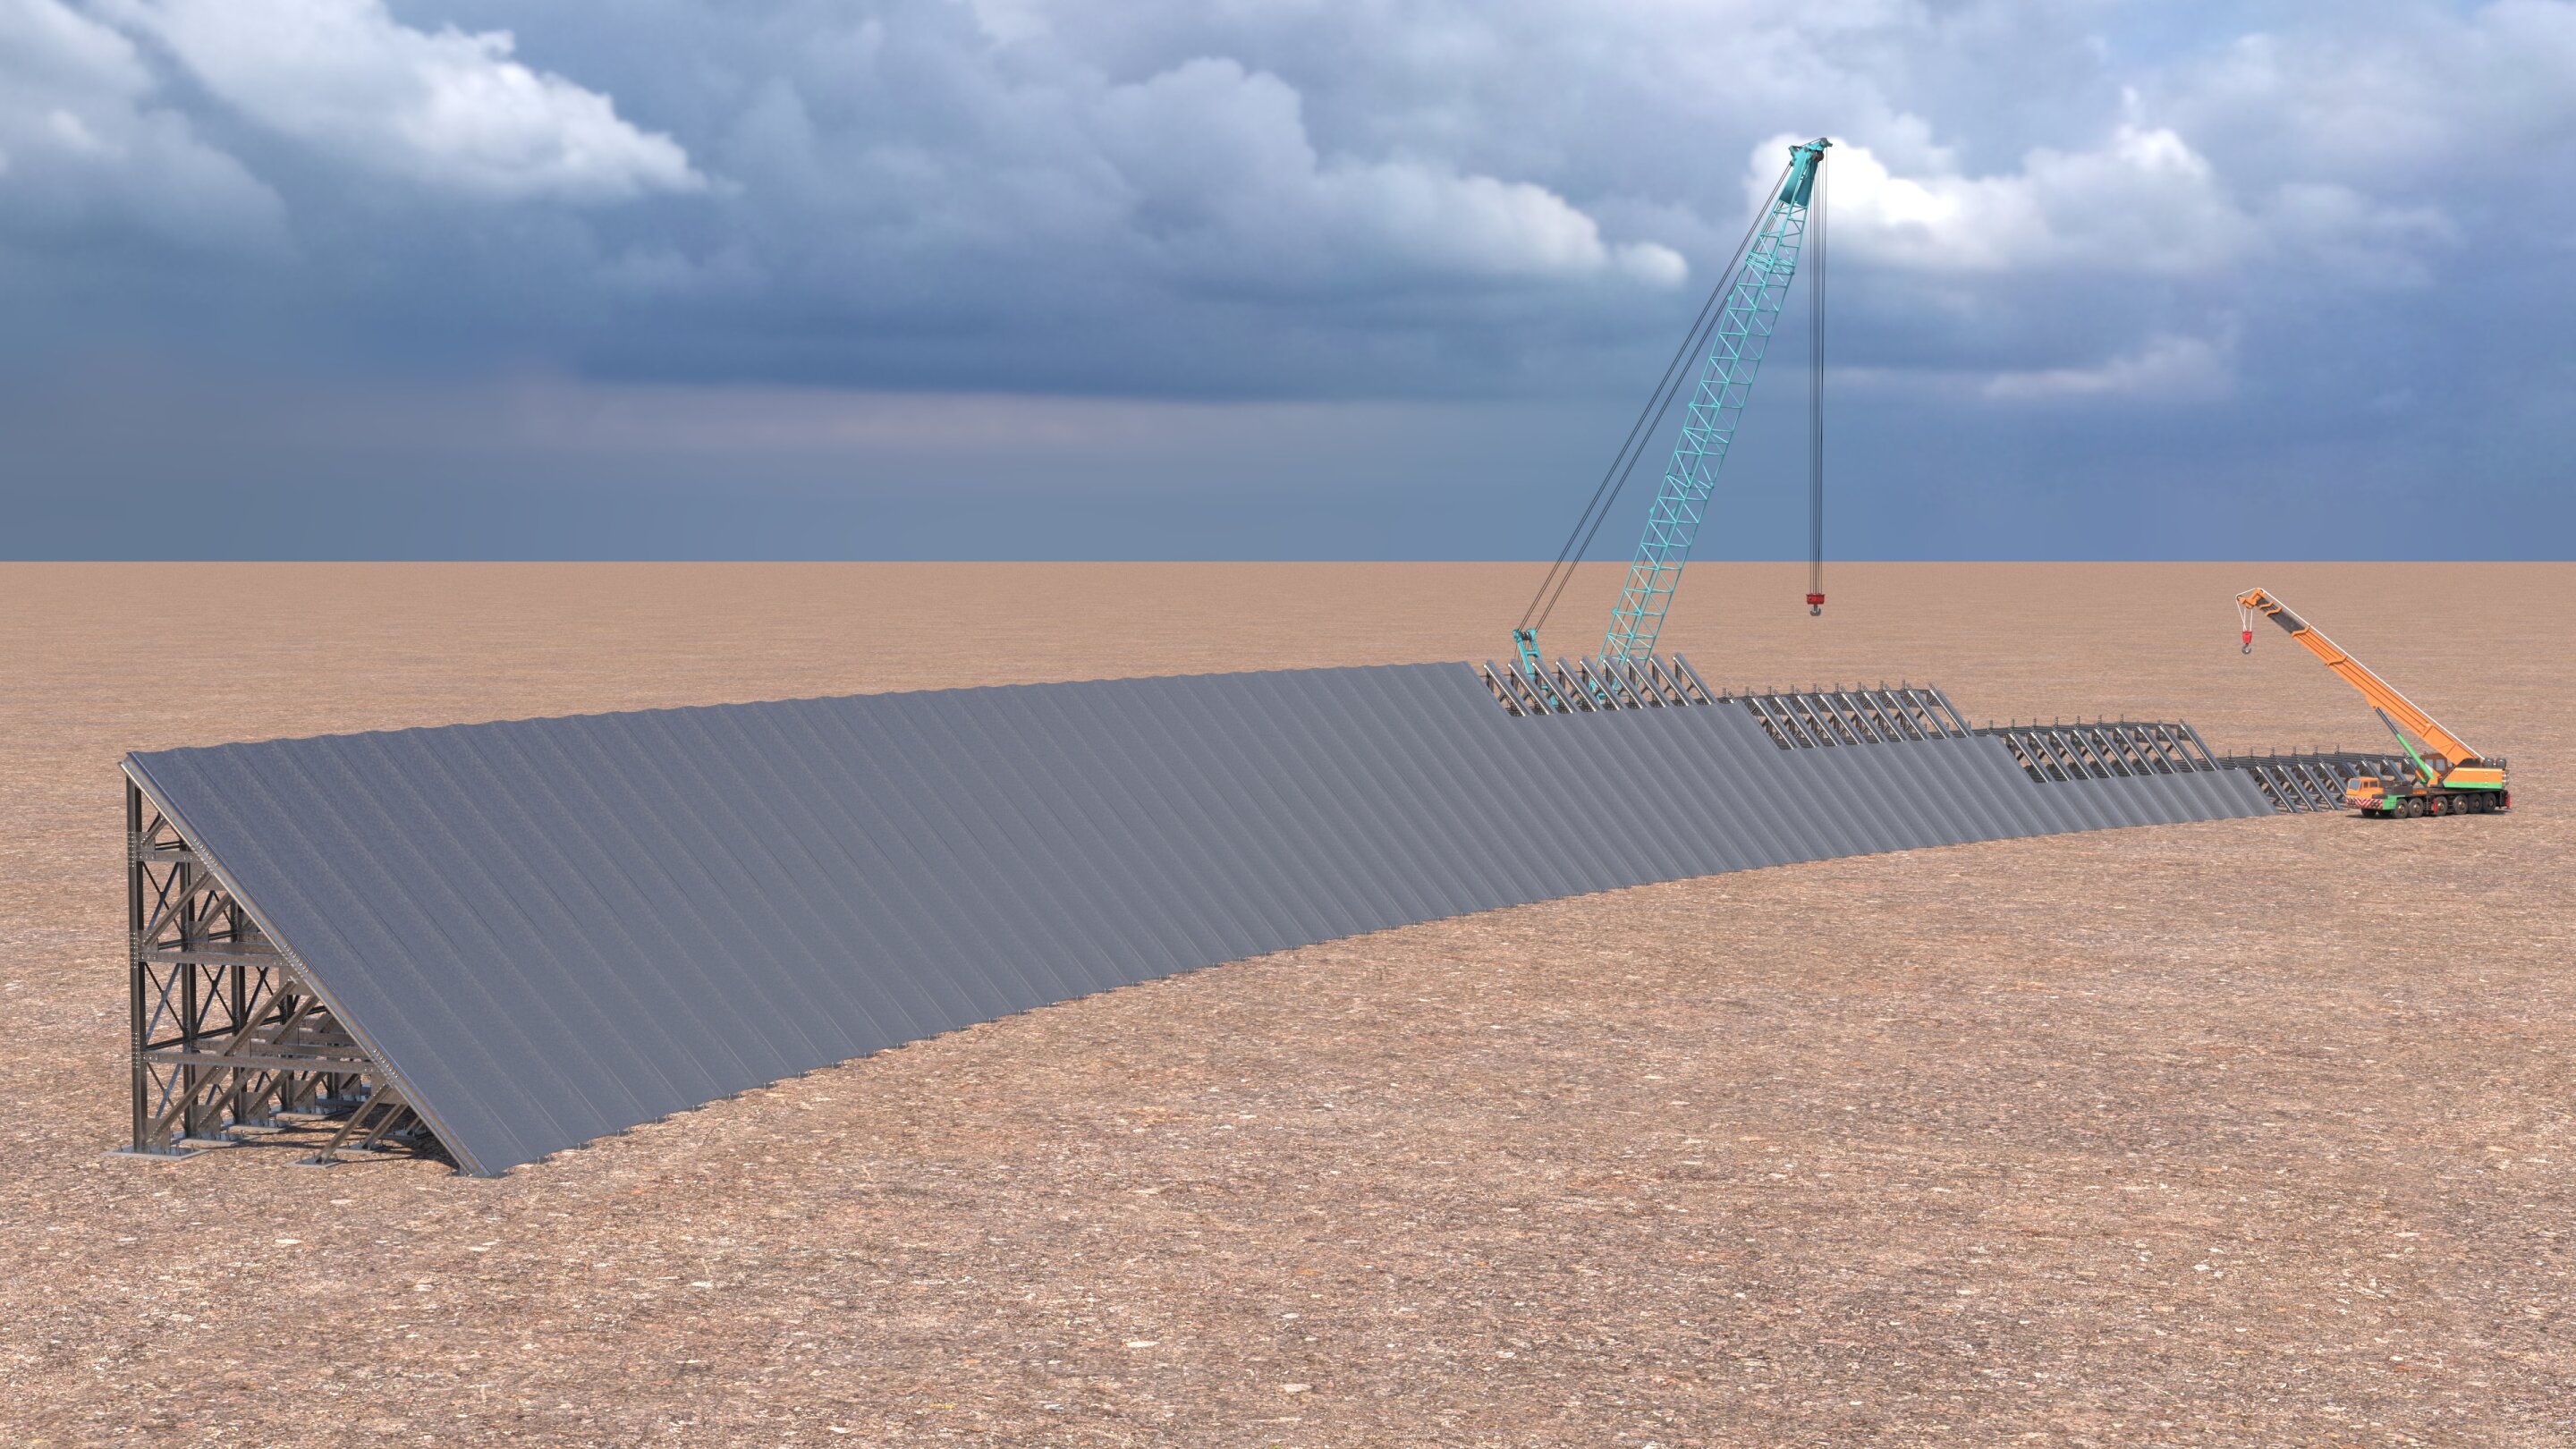 Modular dam design could accelerate the adoption of renewable energy